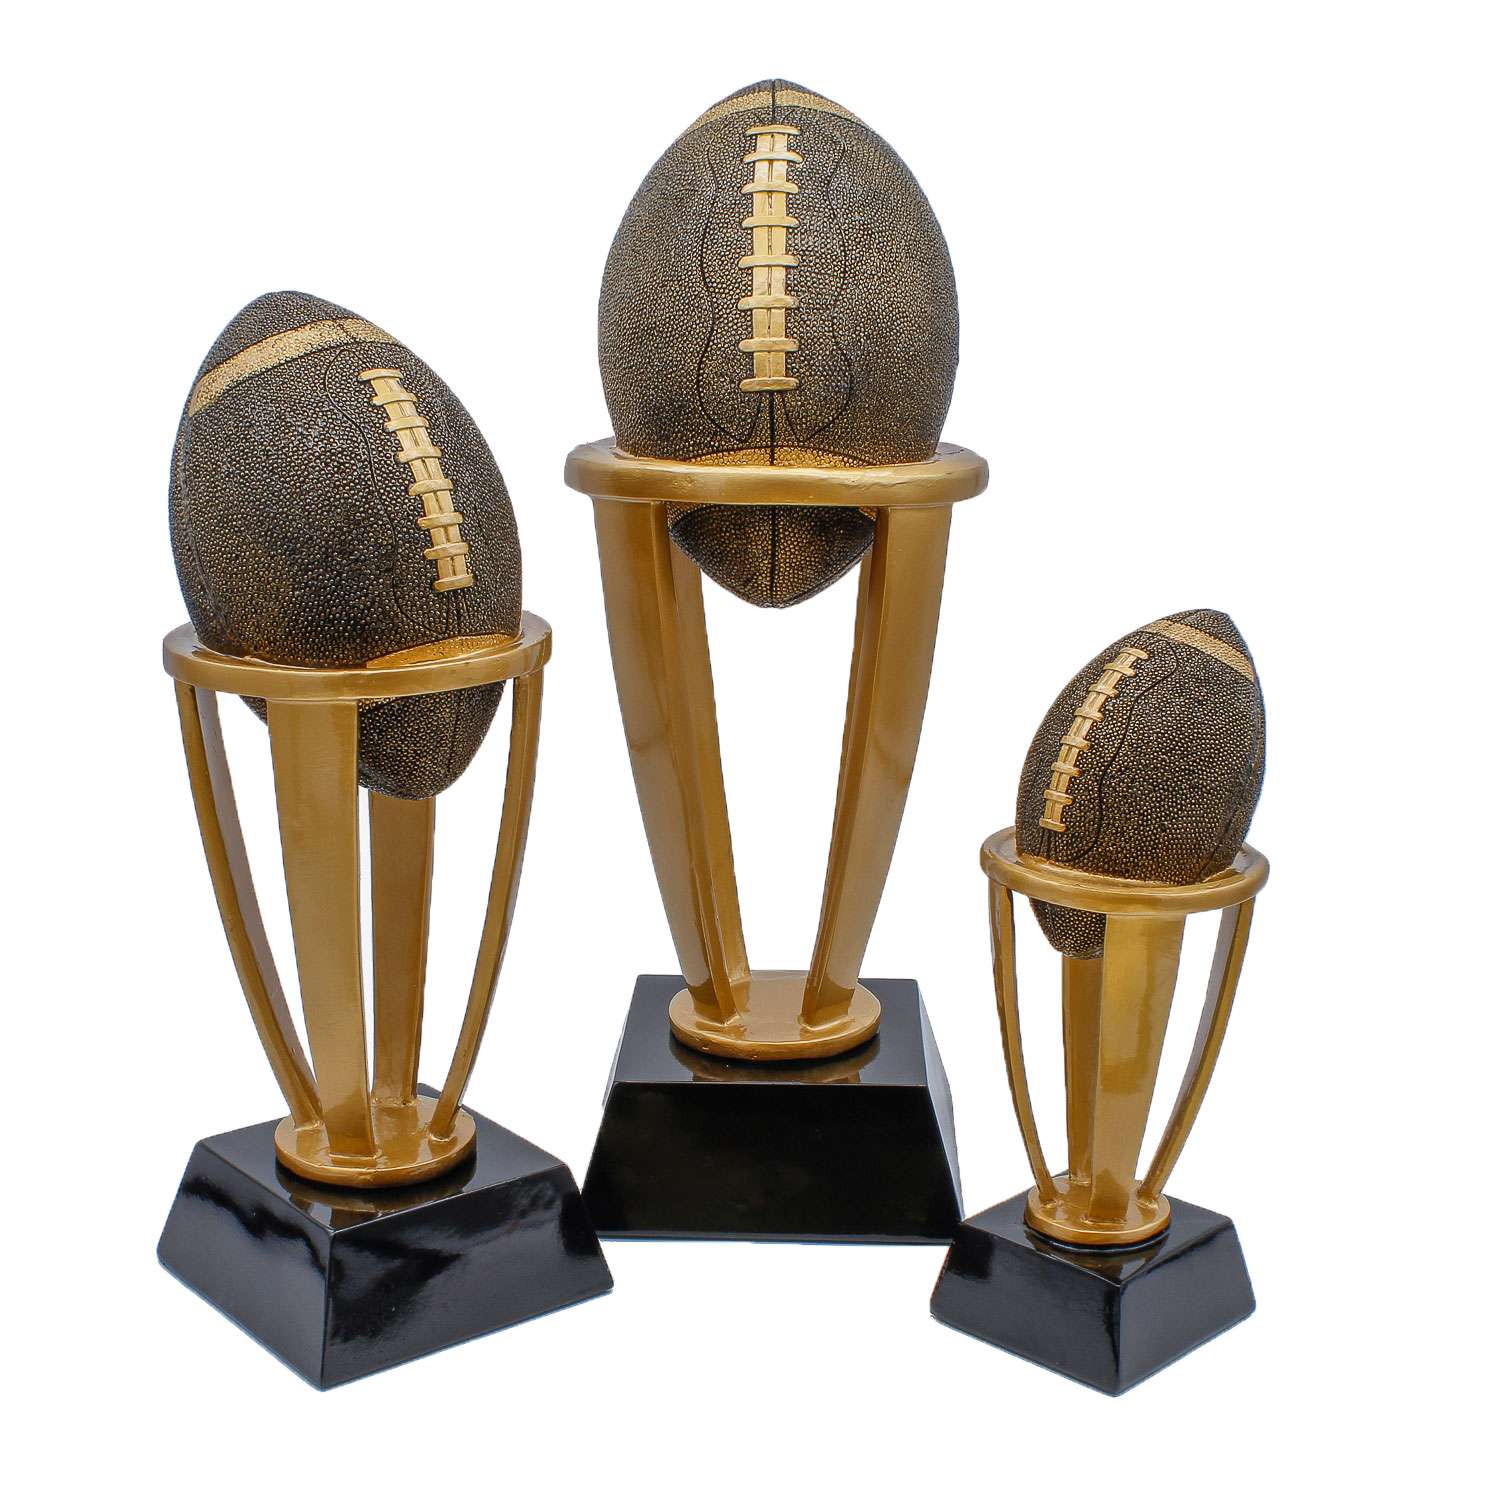 Football Tower Trophy | Engraved Football Award - 7.5, 10.75 or 13 Inch Tall